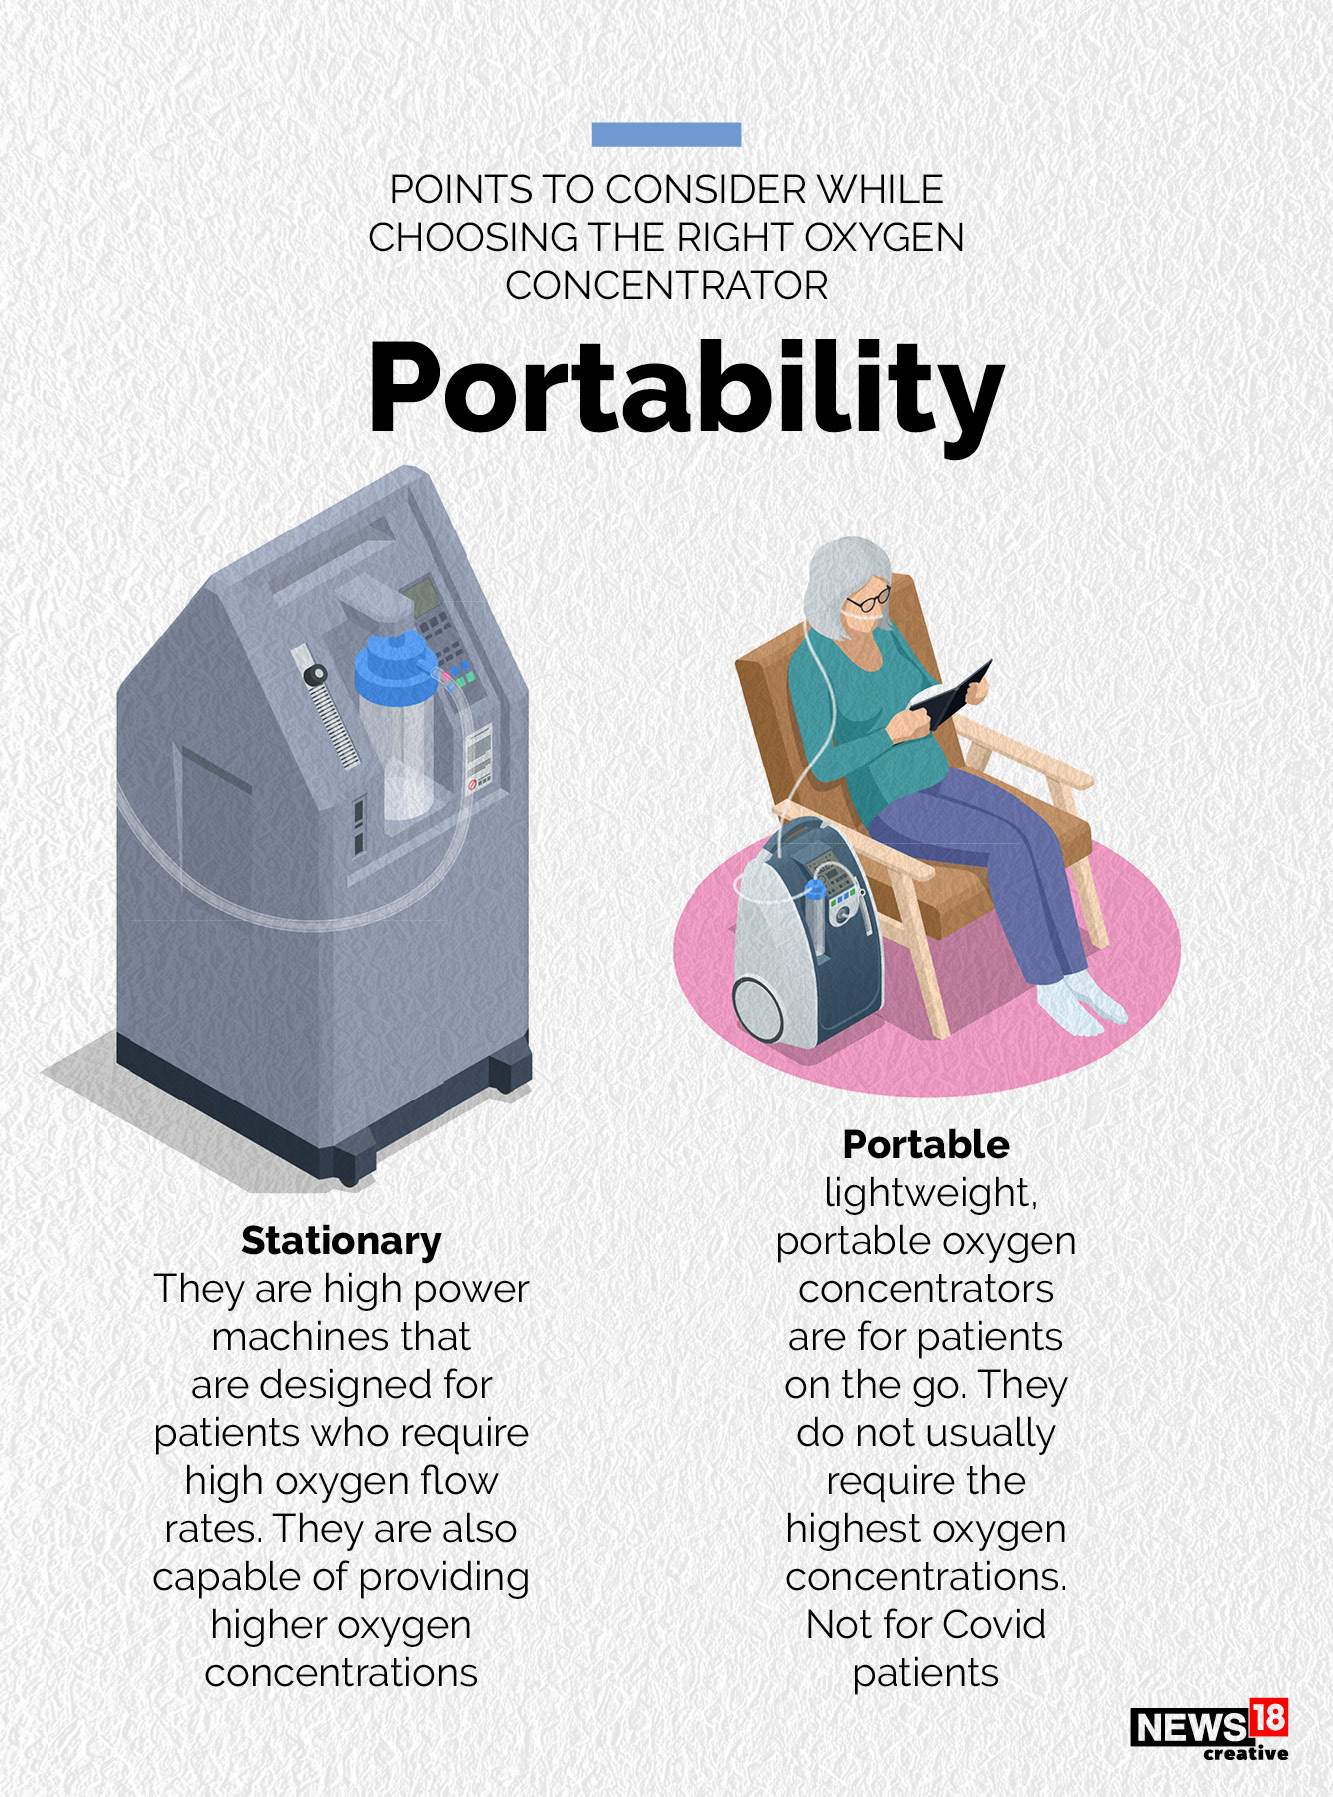 How to choose the right oxygen concentrator